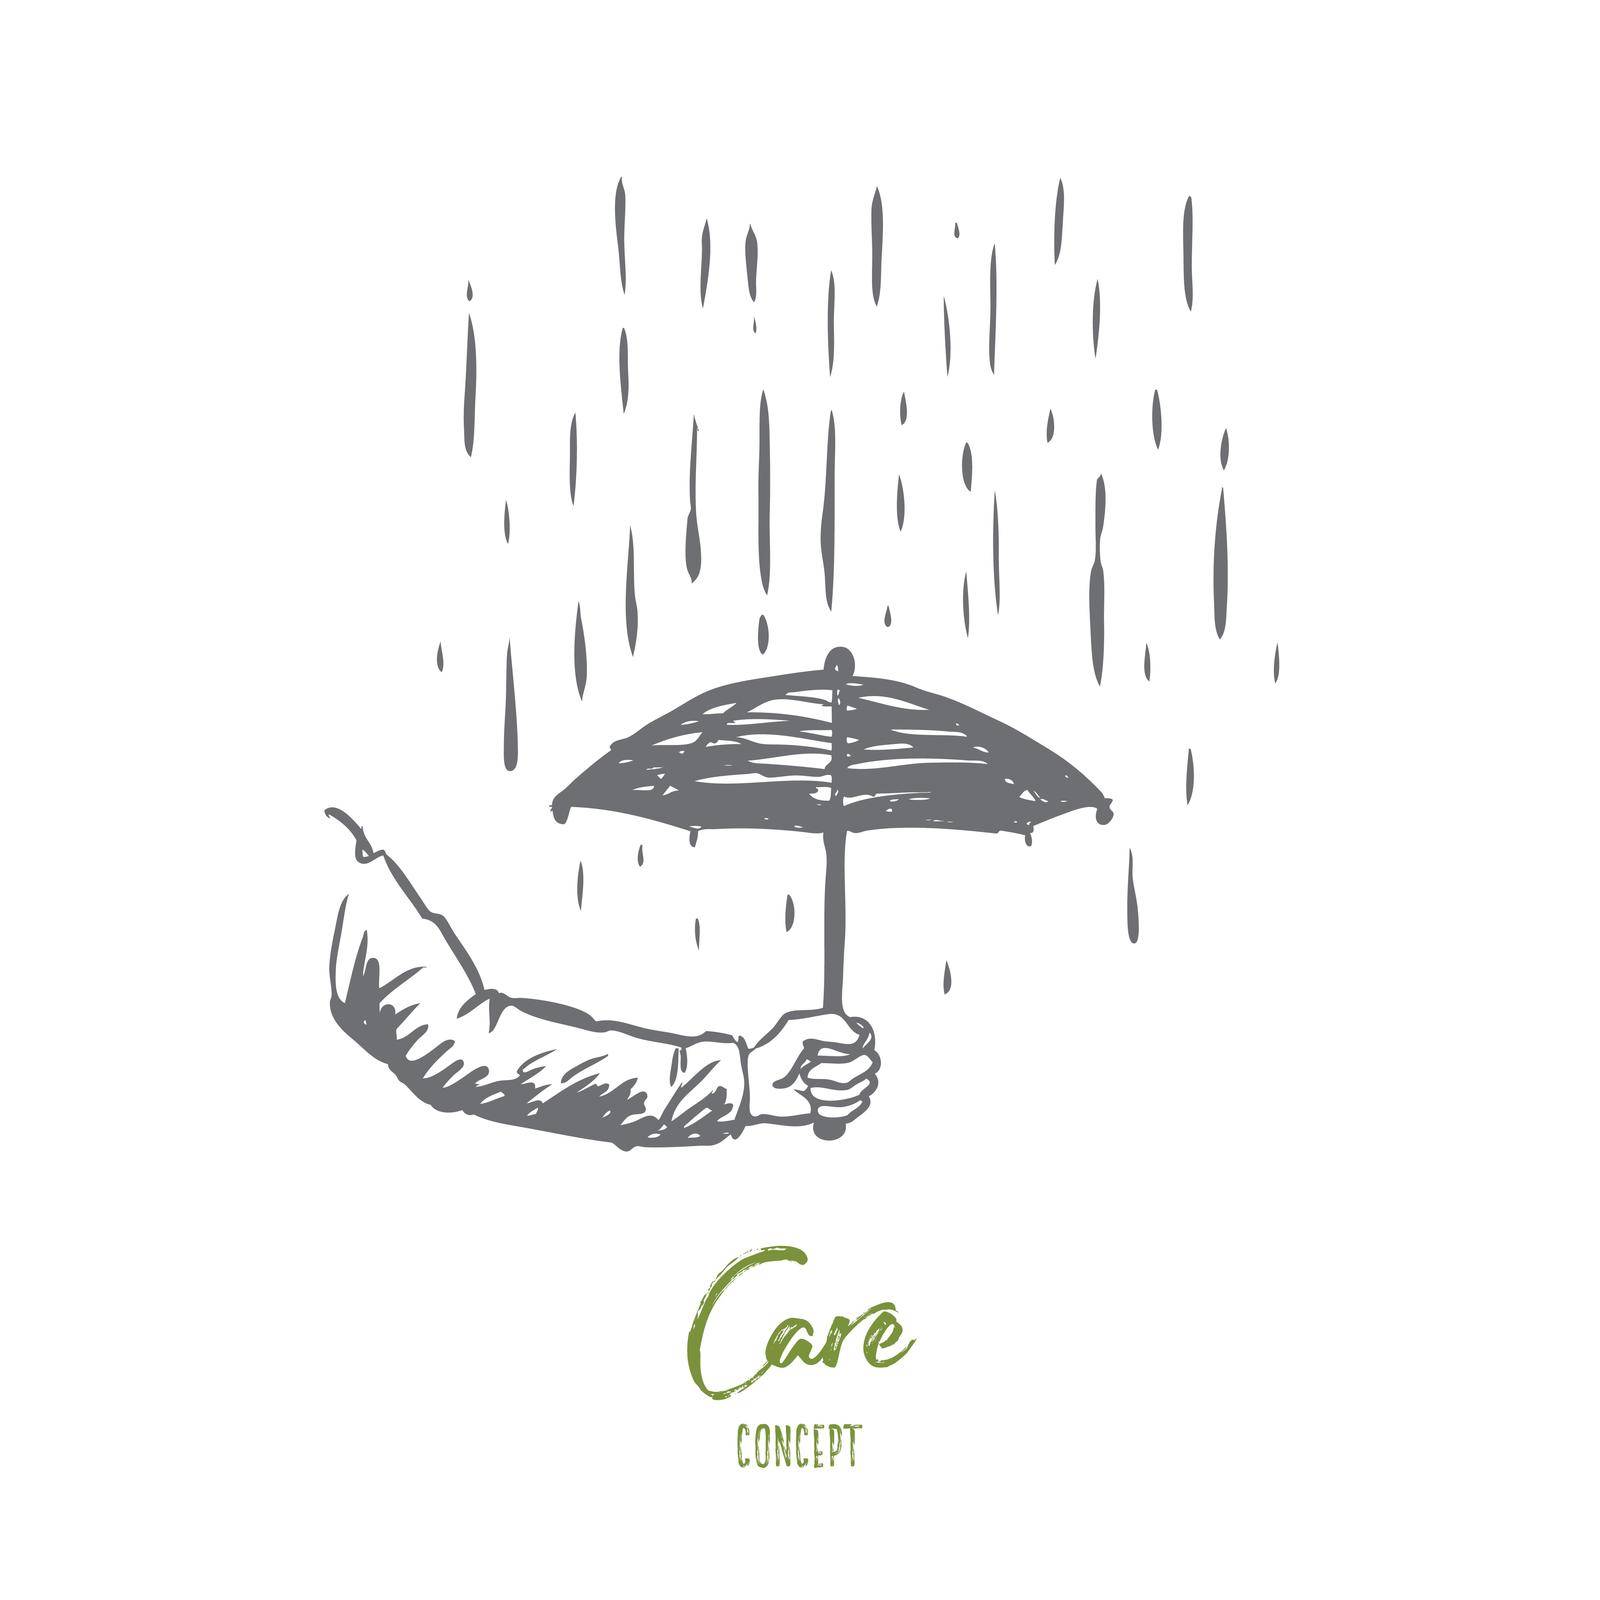 Care, protection, security, business concept. Hand drawn human hand with umbrella and raining concept sketch. Isolated vector illustration.